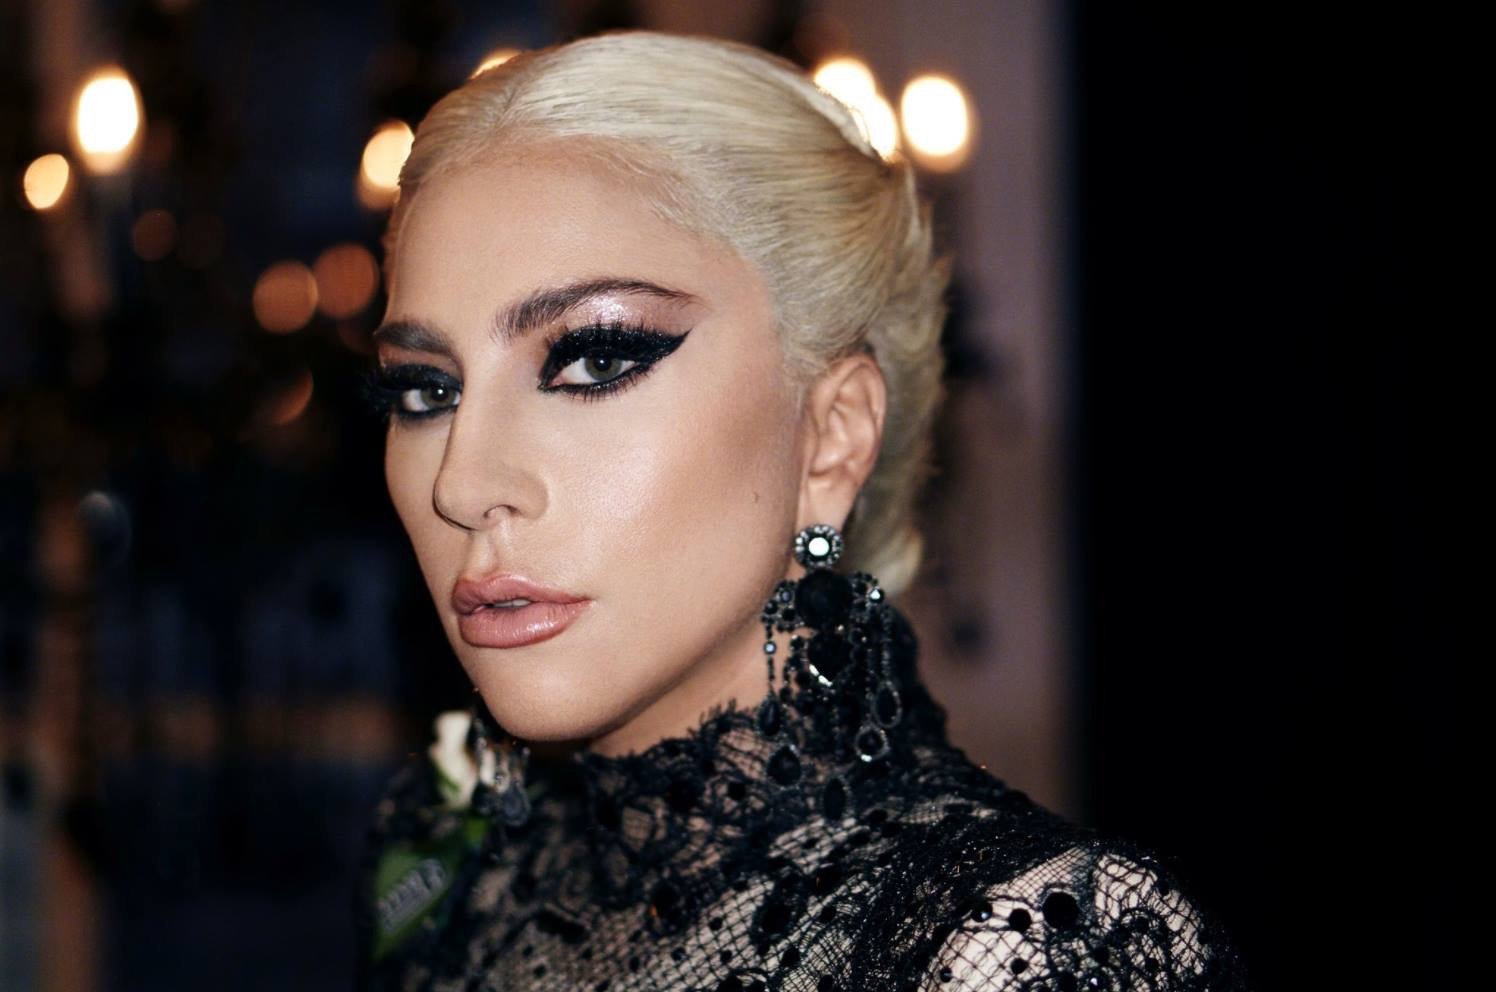 Are You a True Little Monster? Test Your Knowledge on Lady Gaga!